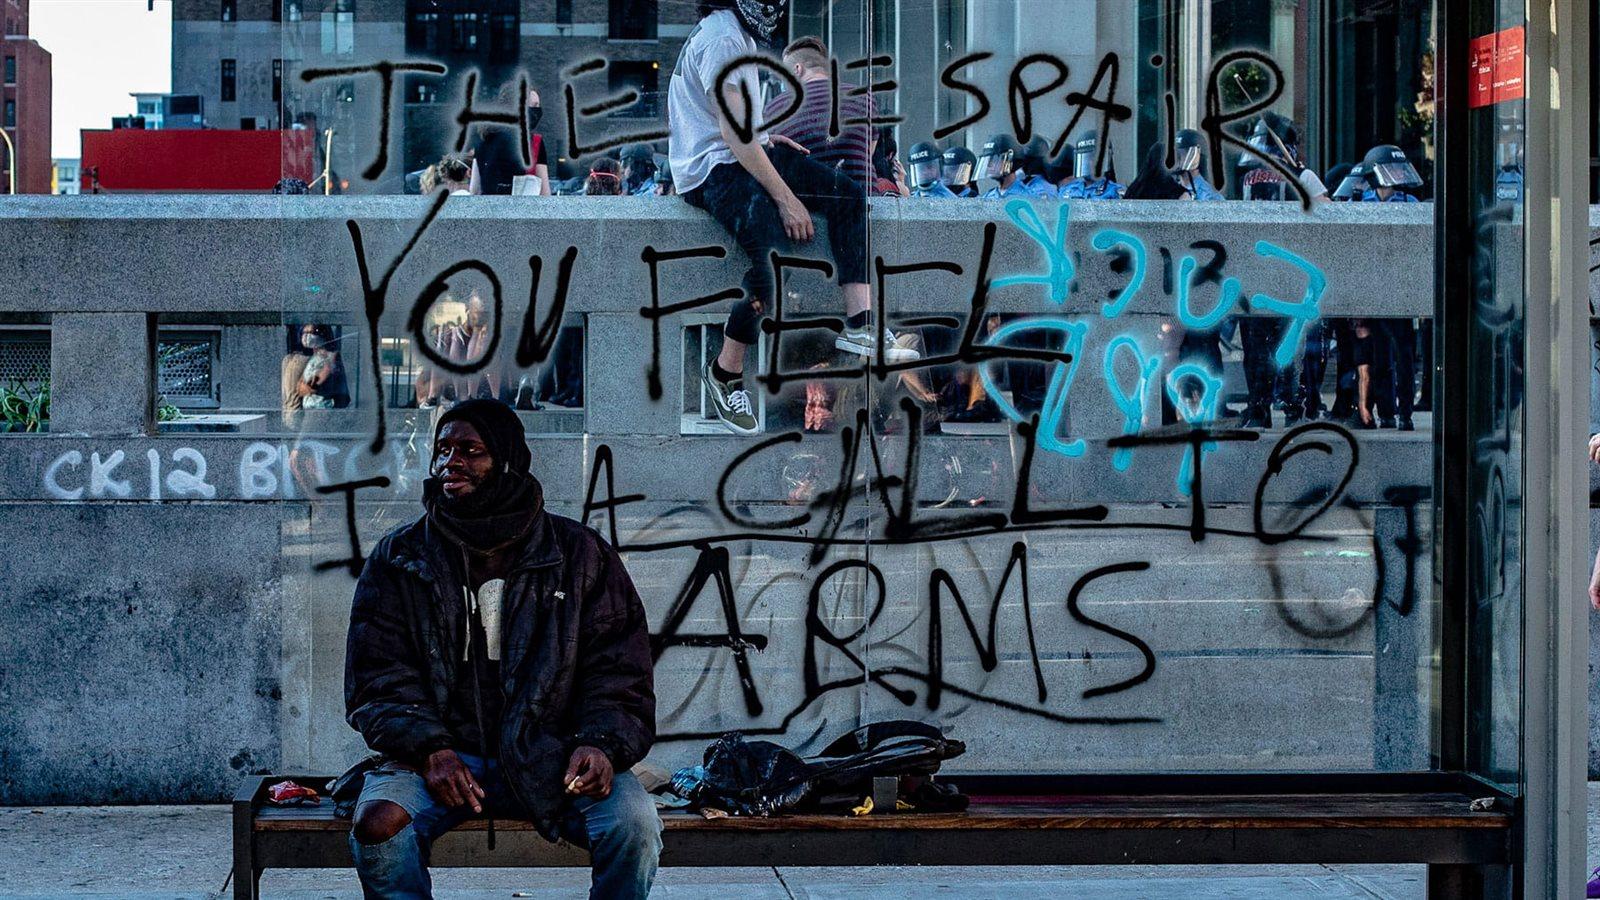 A man sits in a bus terminal spray-painted with the words &quot;The despair you feel is a call to arms.&quot;